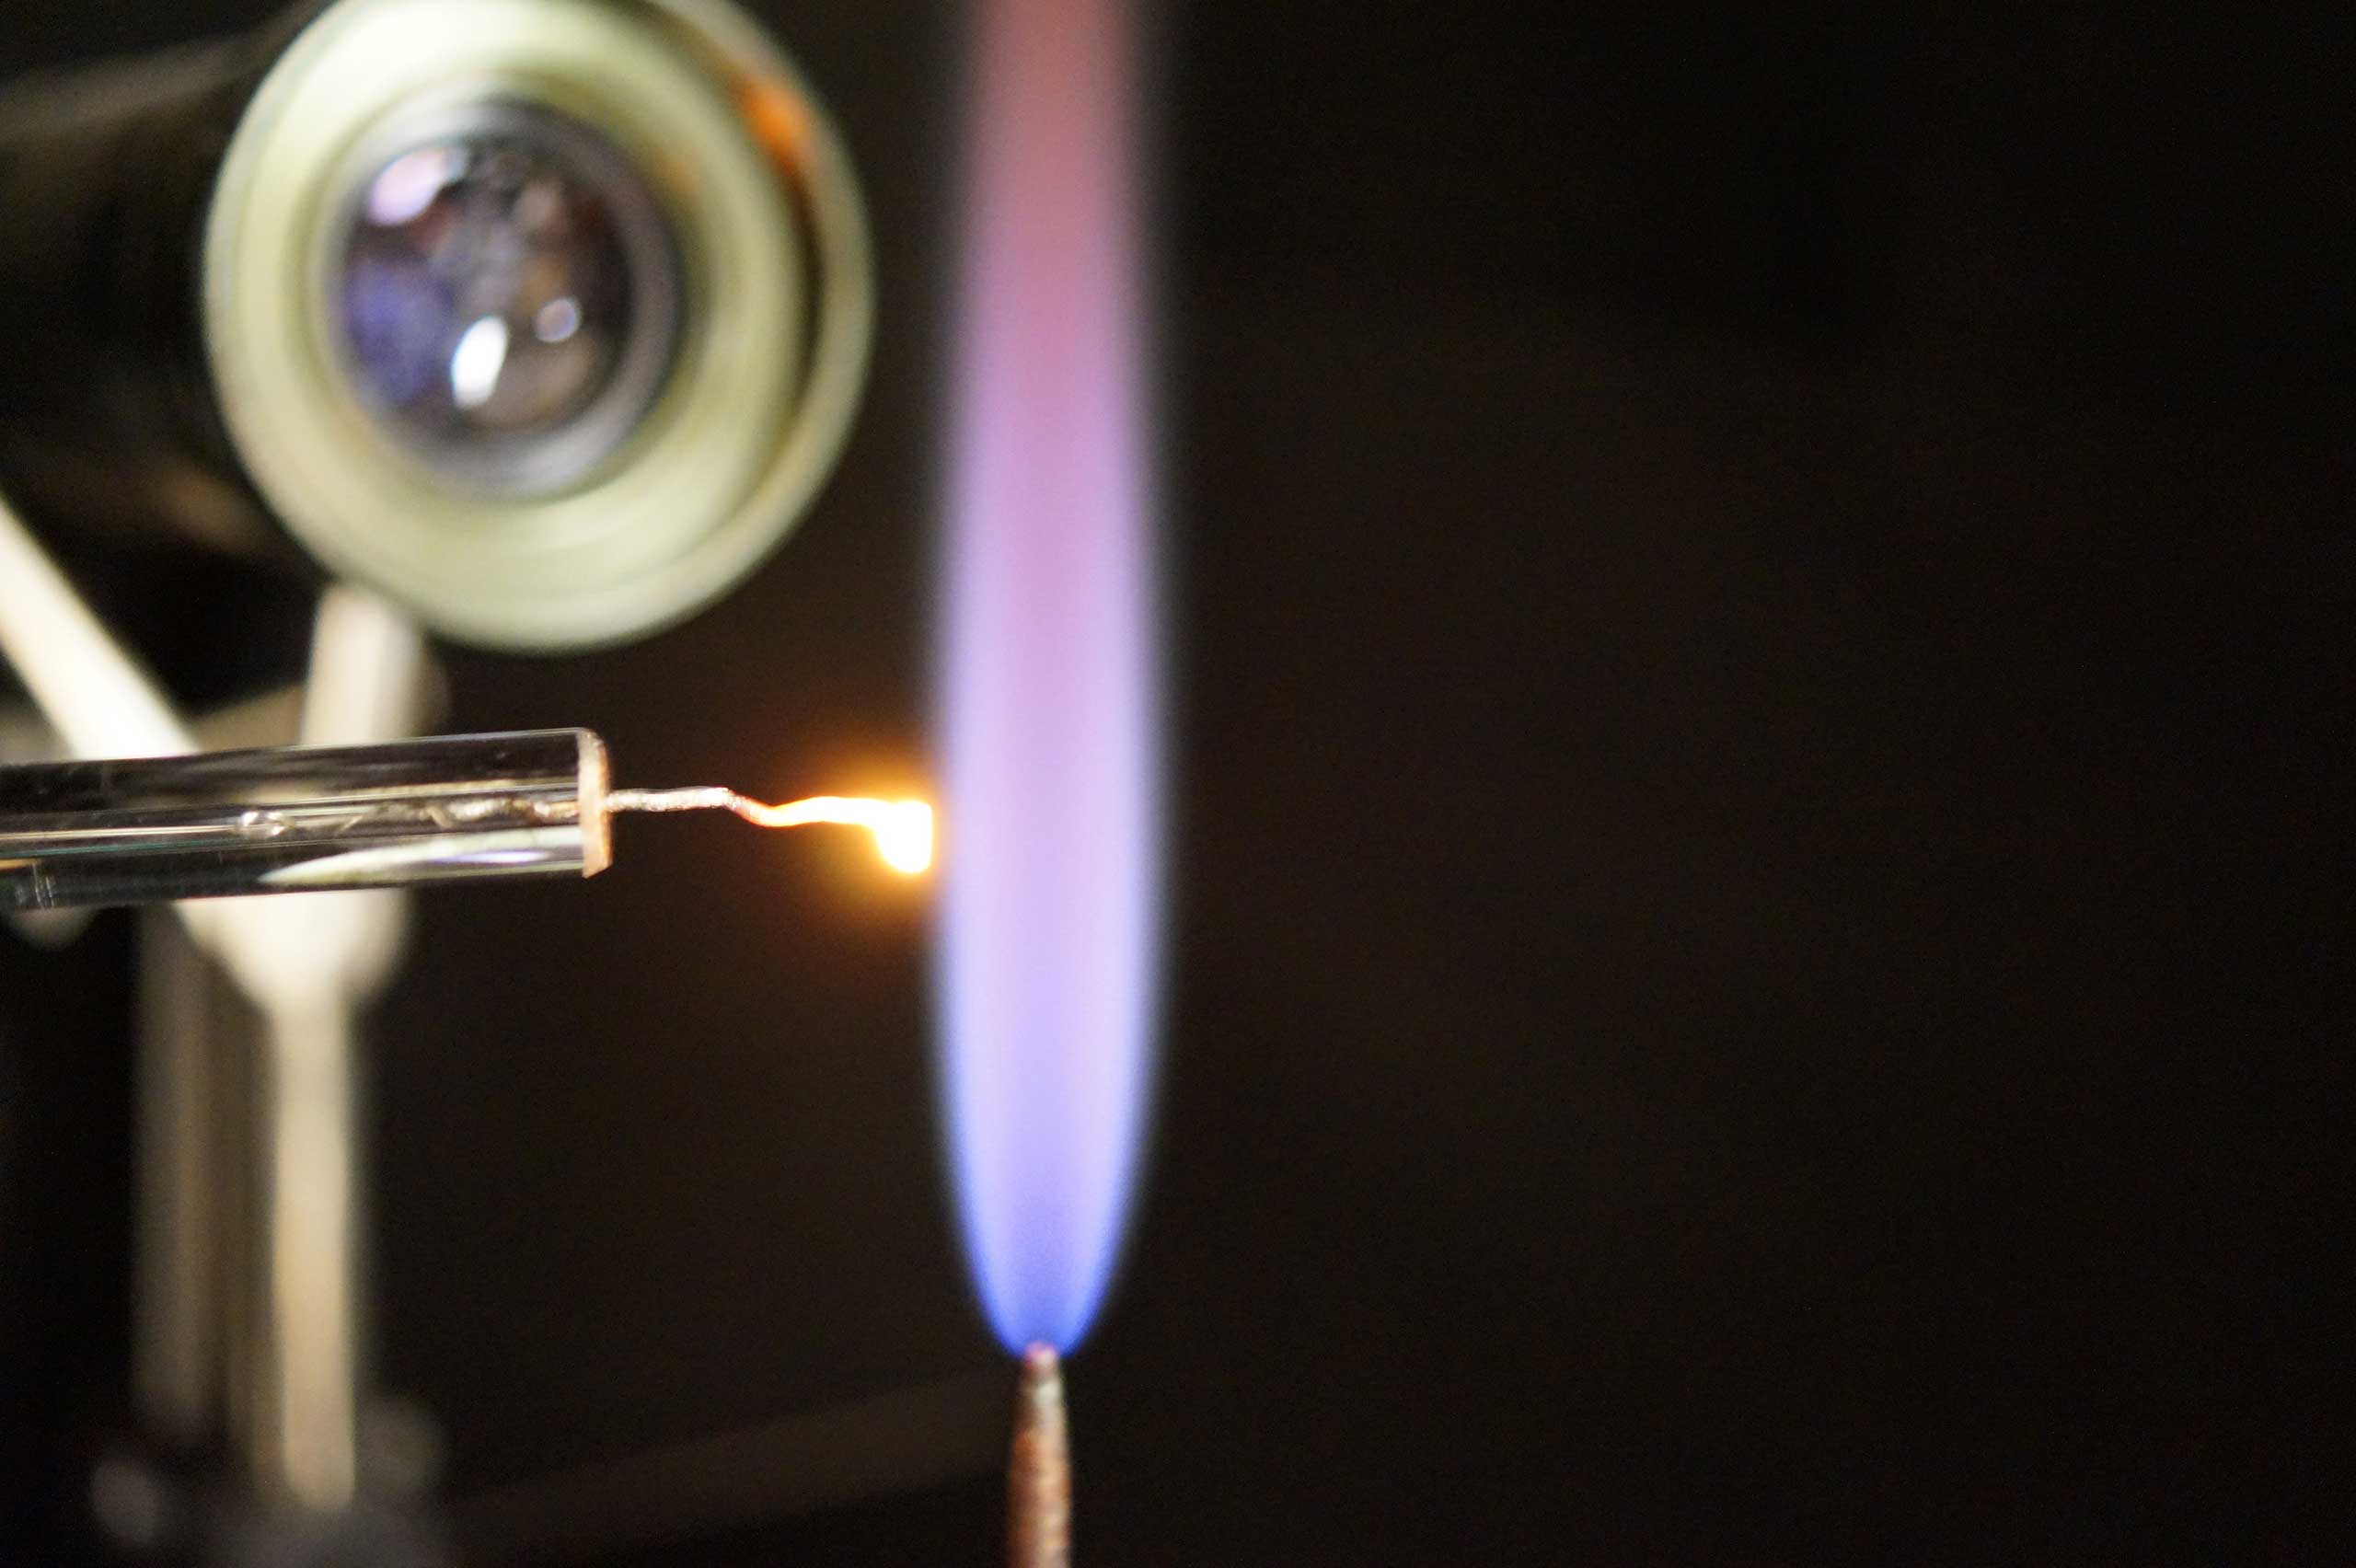 A platinum single crystal being annealed using a hydrogen flame